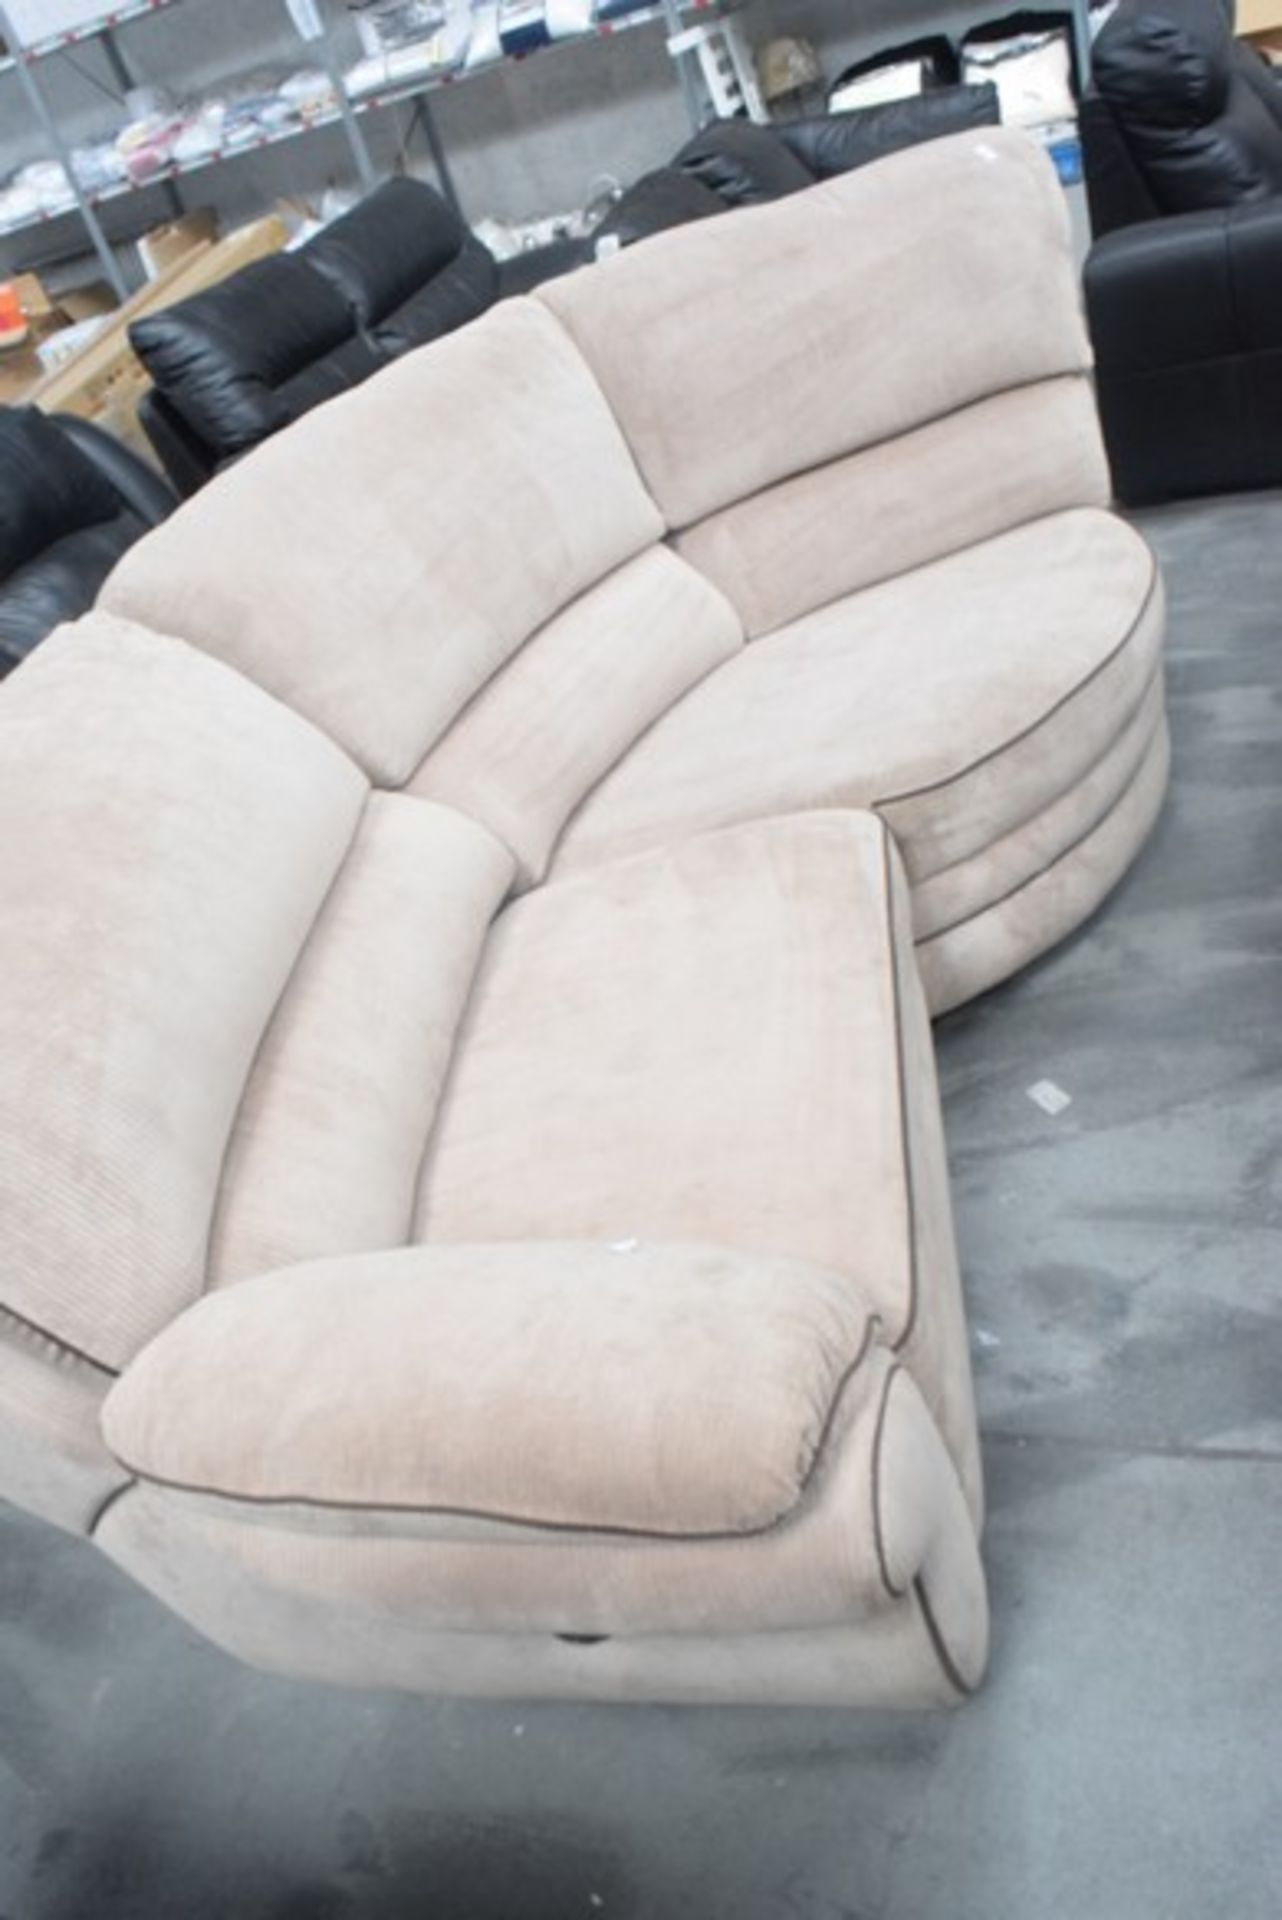 1 x DESIGNER CURVED FABRIC SOFA RRP £200 26.05.17 *PLEASE NOTE THAT THE BID PRICE IS MULTIPLIED BY